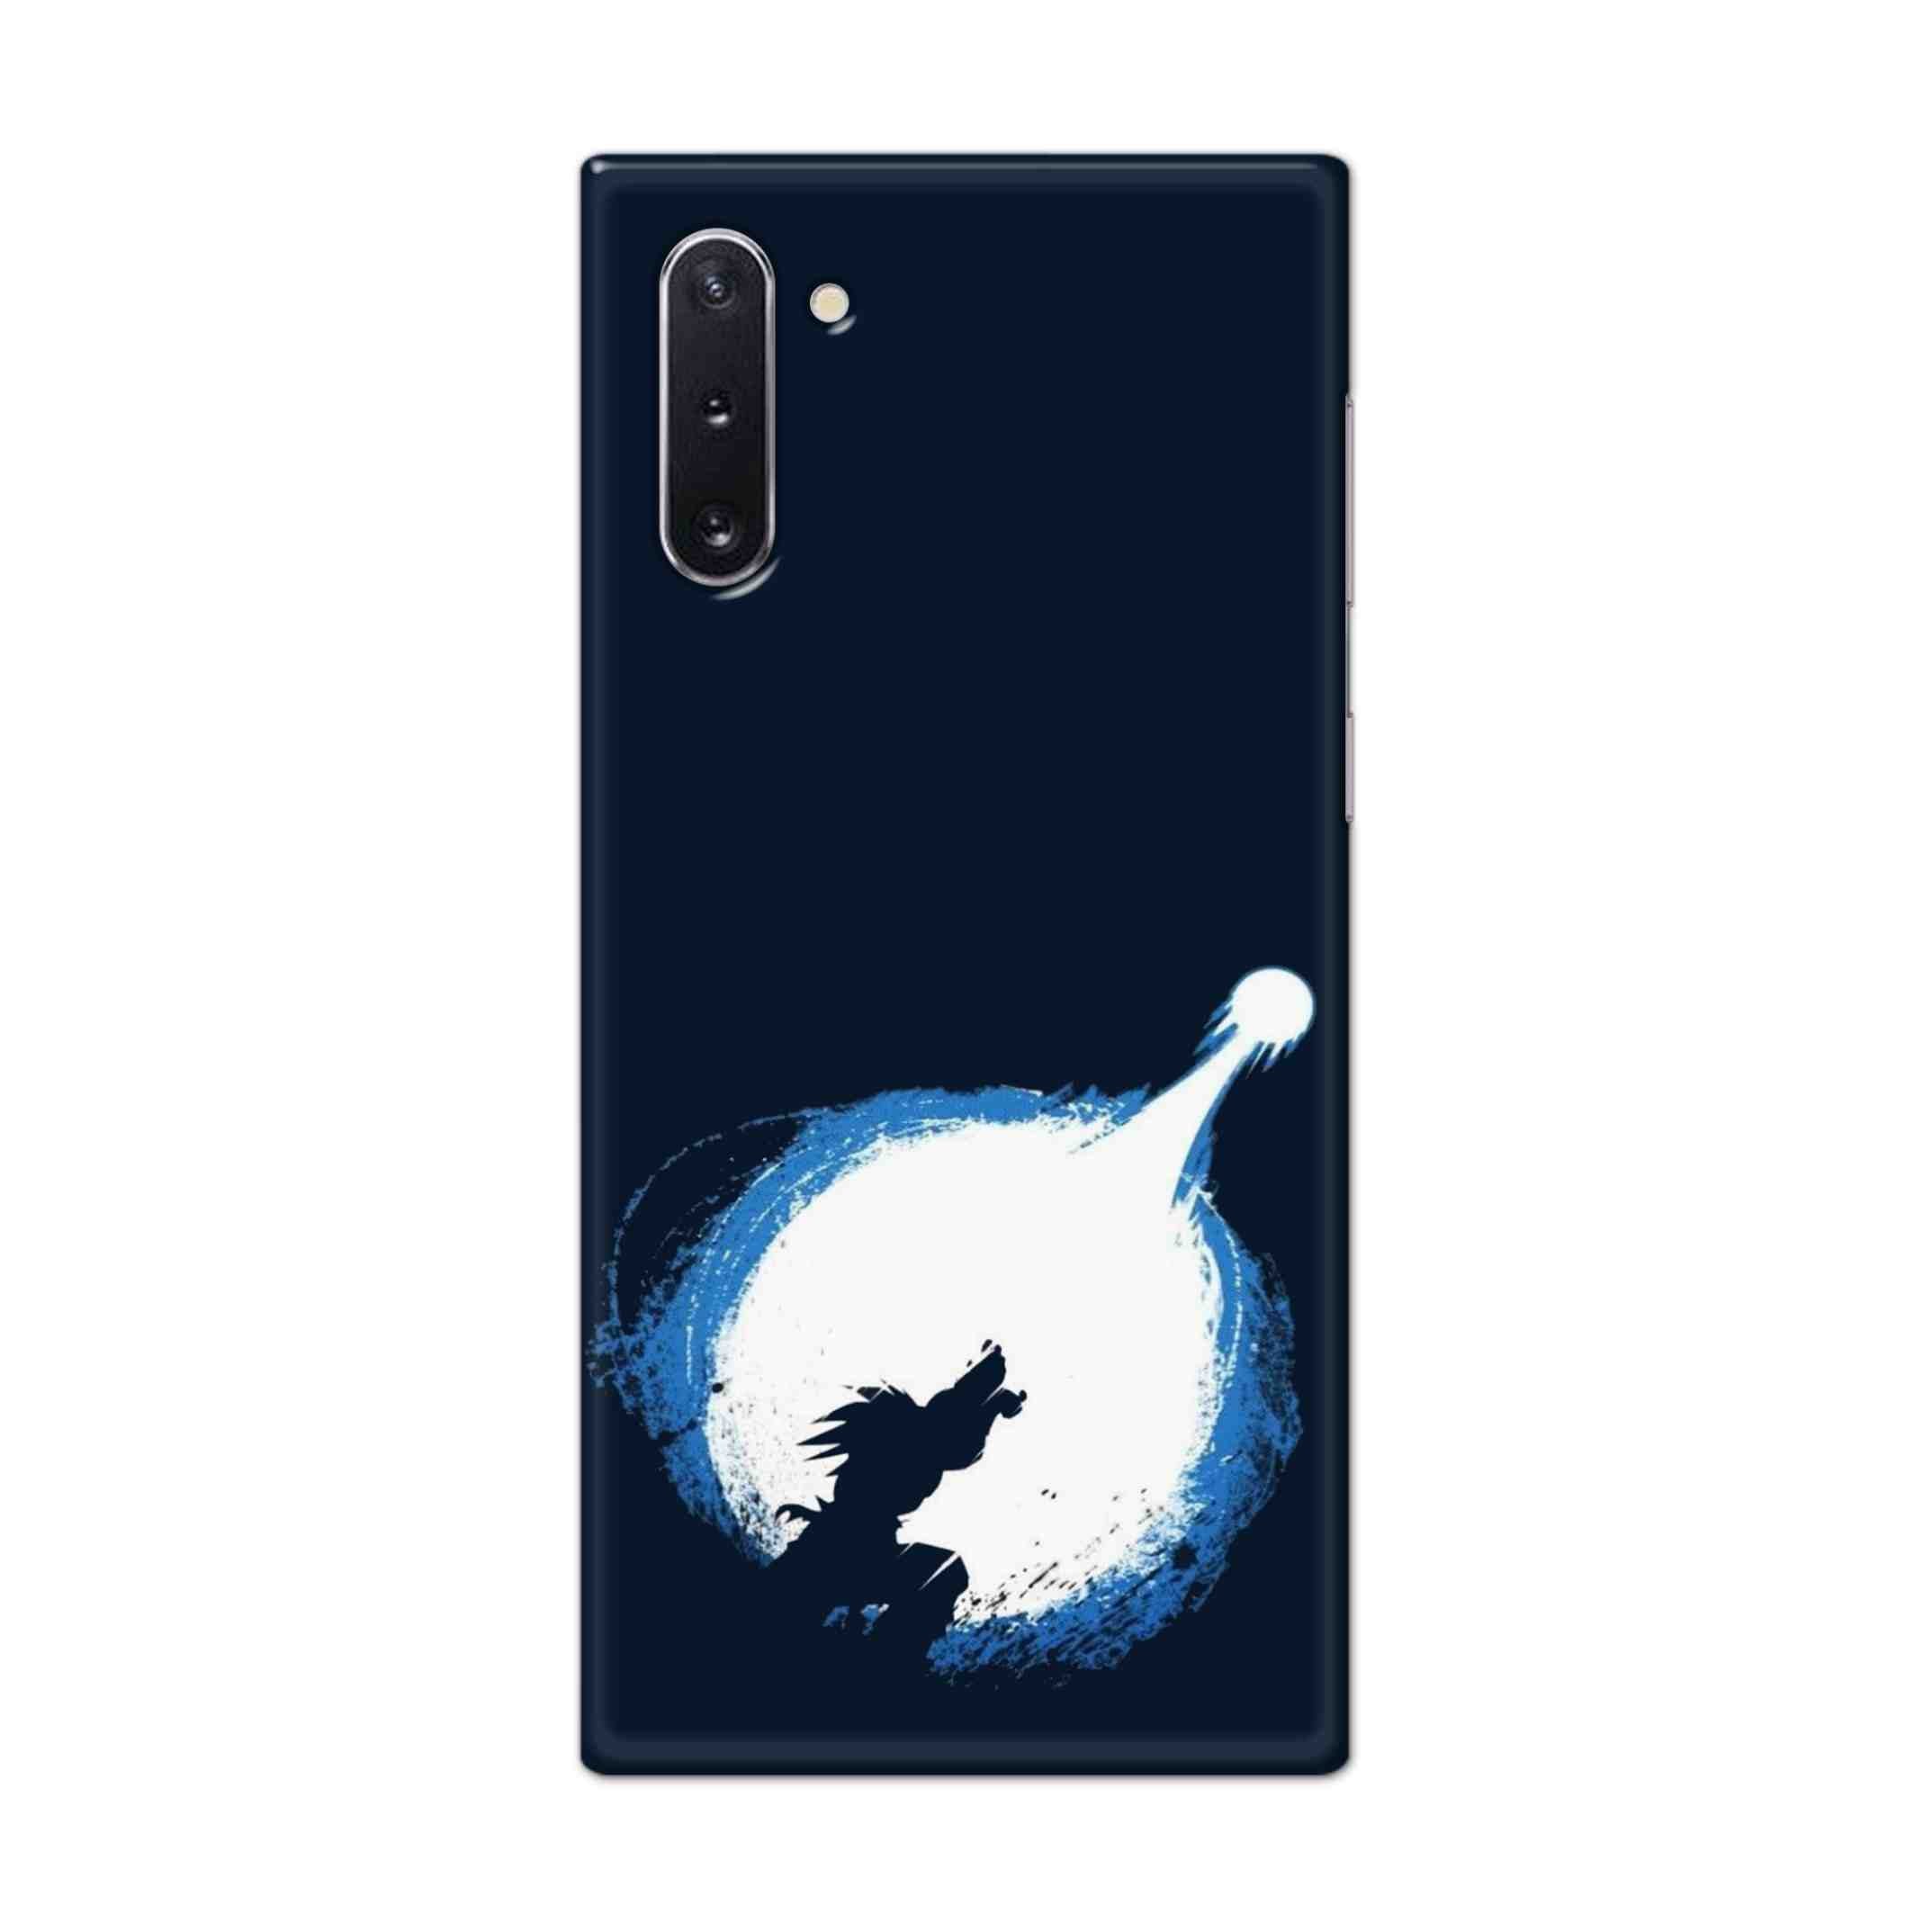 Buy Goku Power Hard Back Mobile Phone Case Cover For Samsung Galaxy Note 10 Online